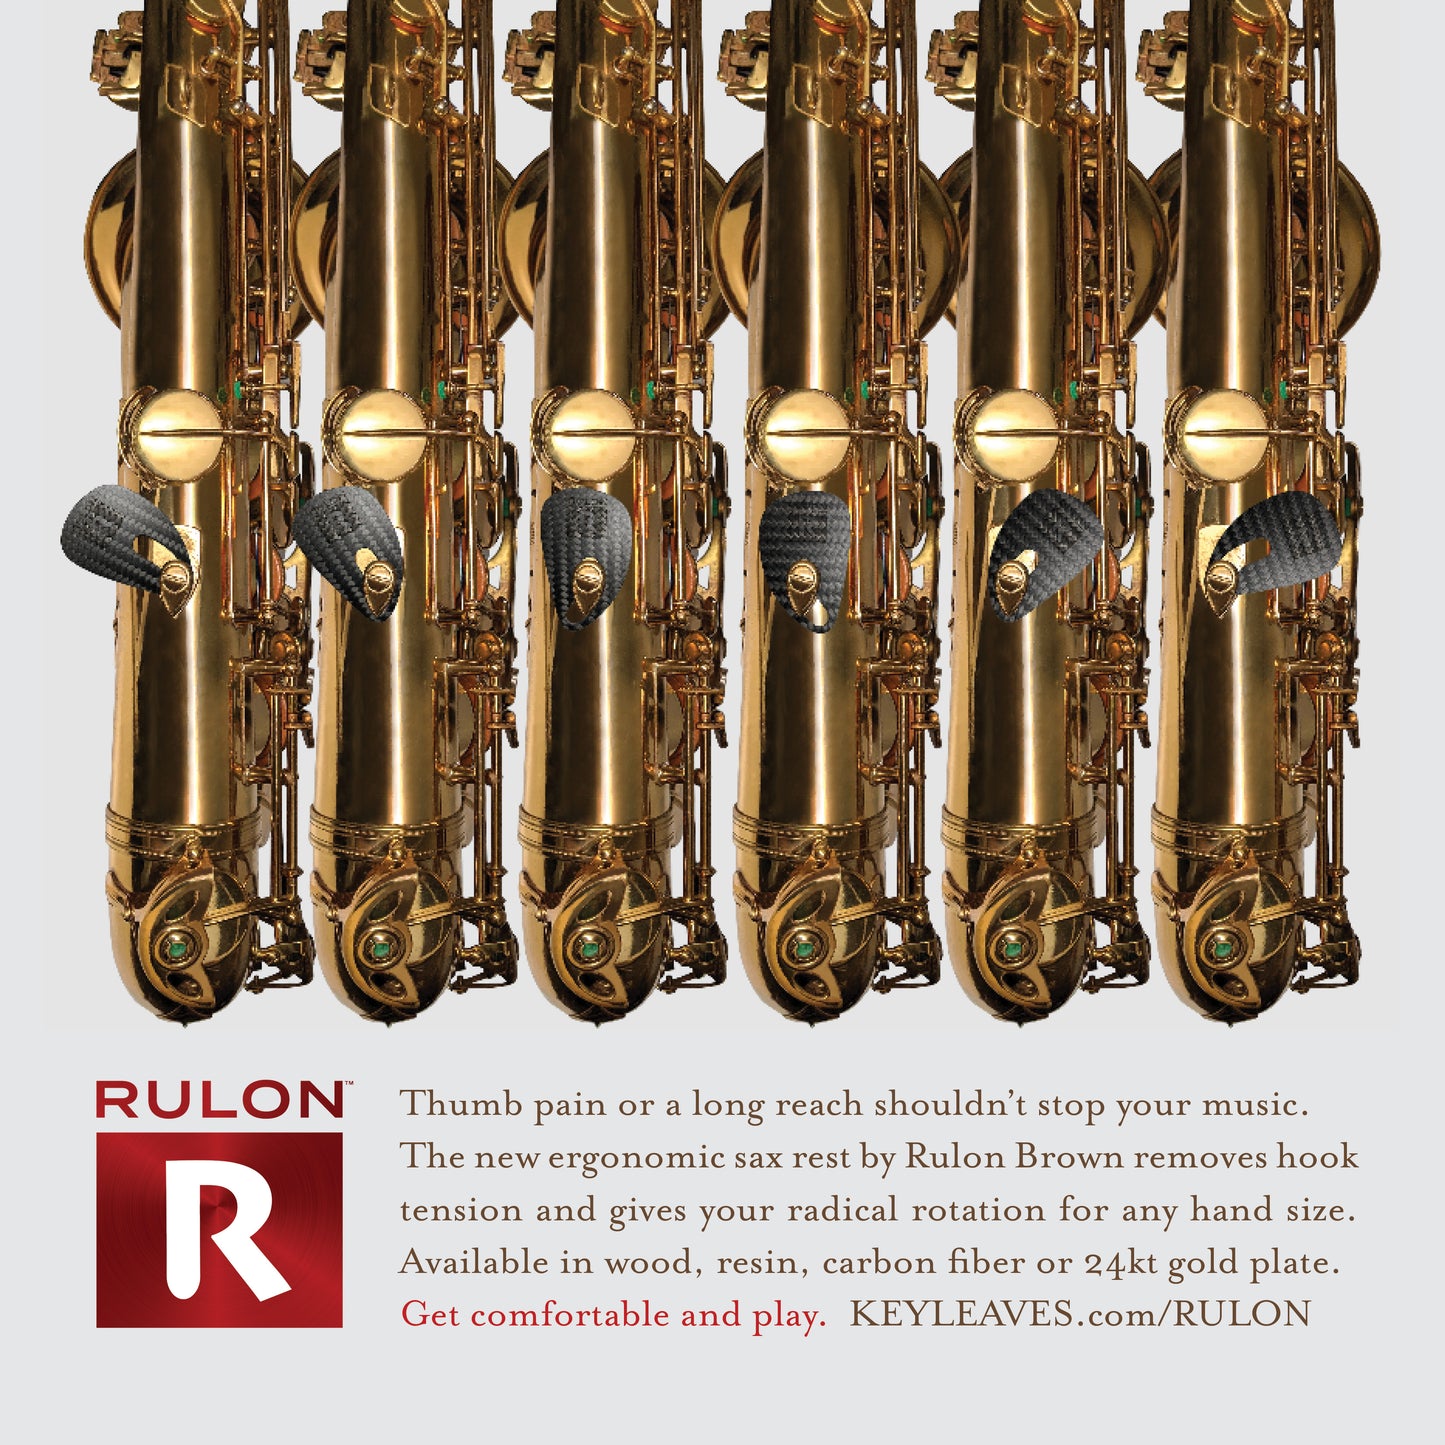 The RULON saxophone thumb rest adjusts to fit any hand size and removes the right thumb hook that can cause pain or discomfort while playing saxophone.